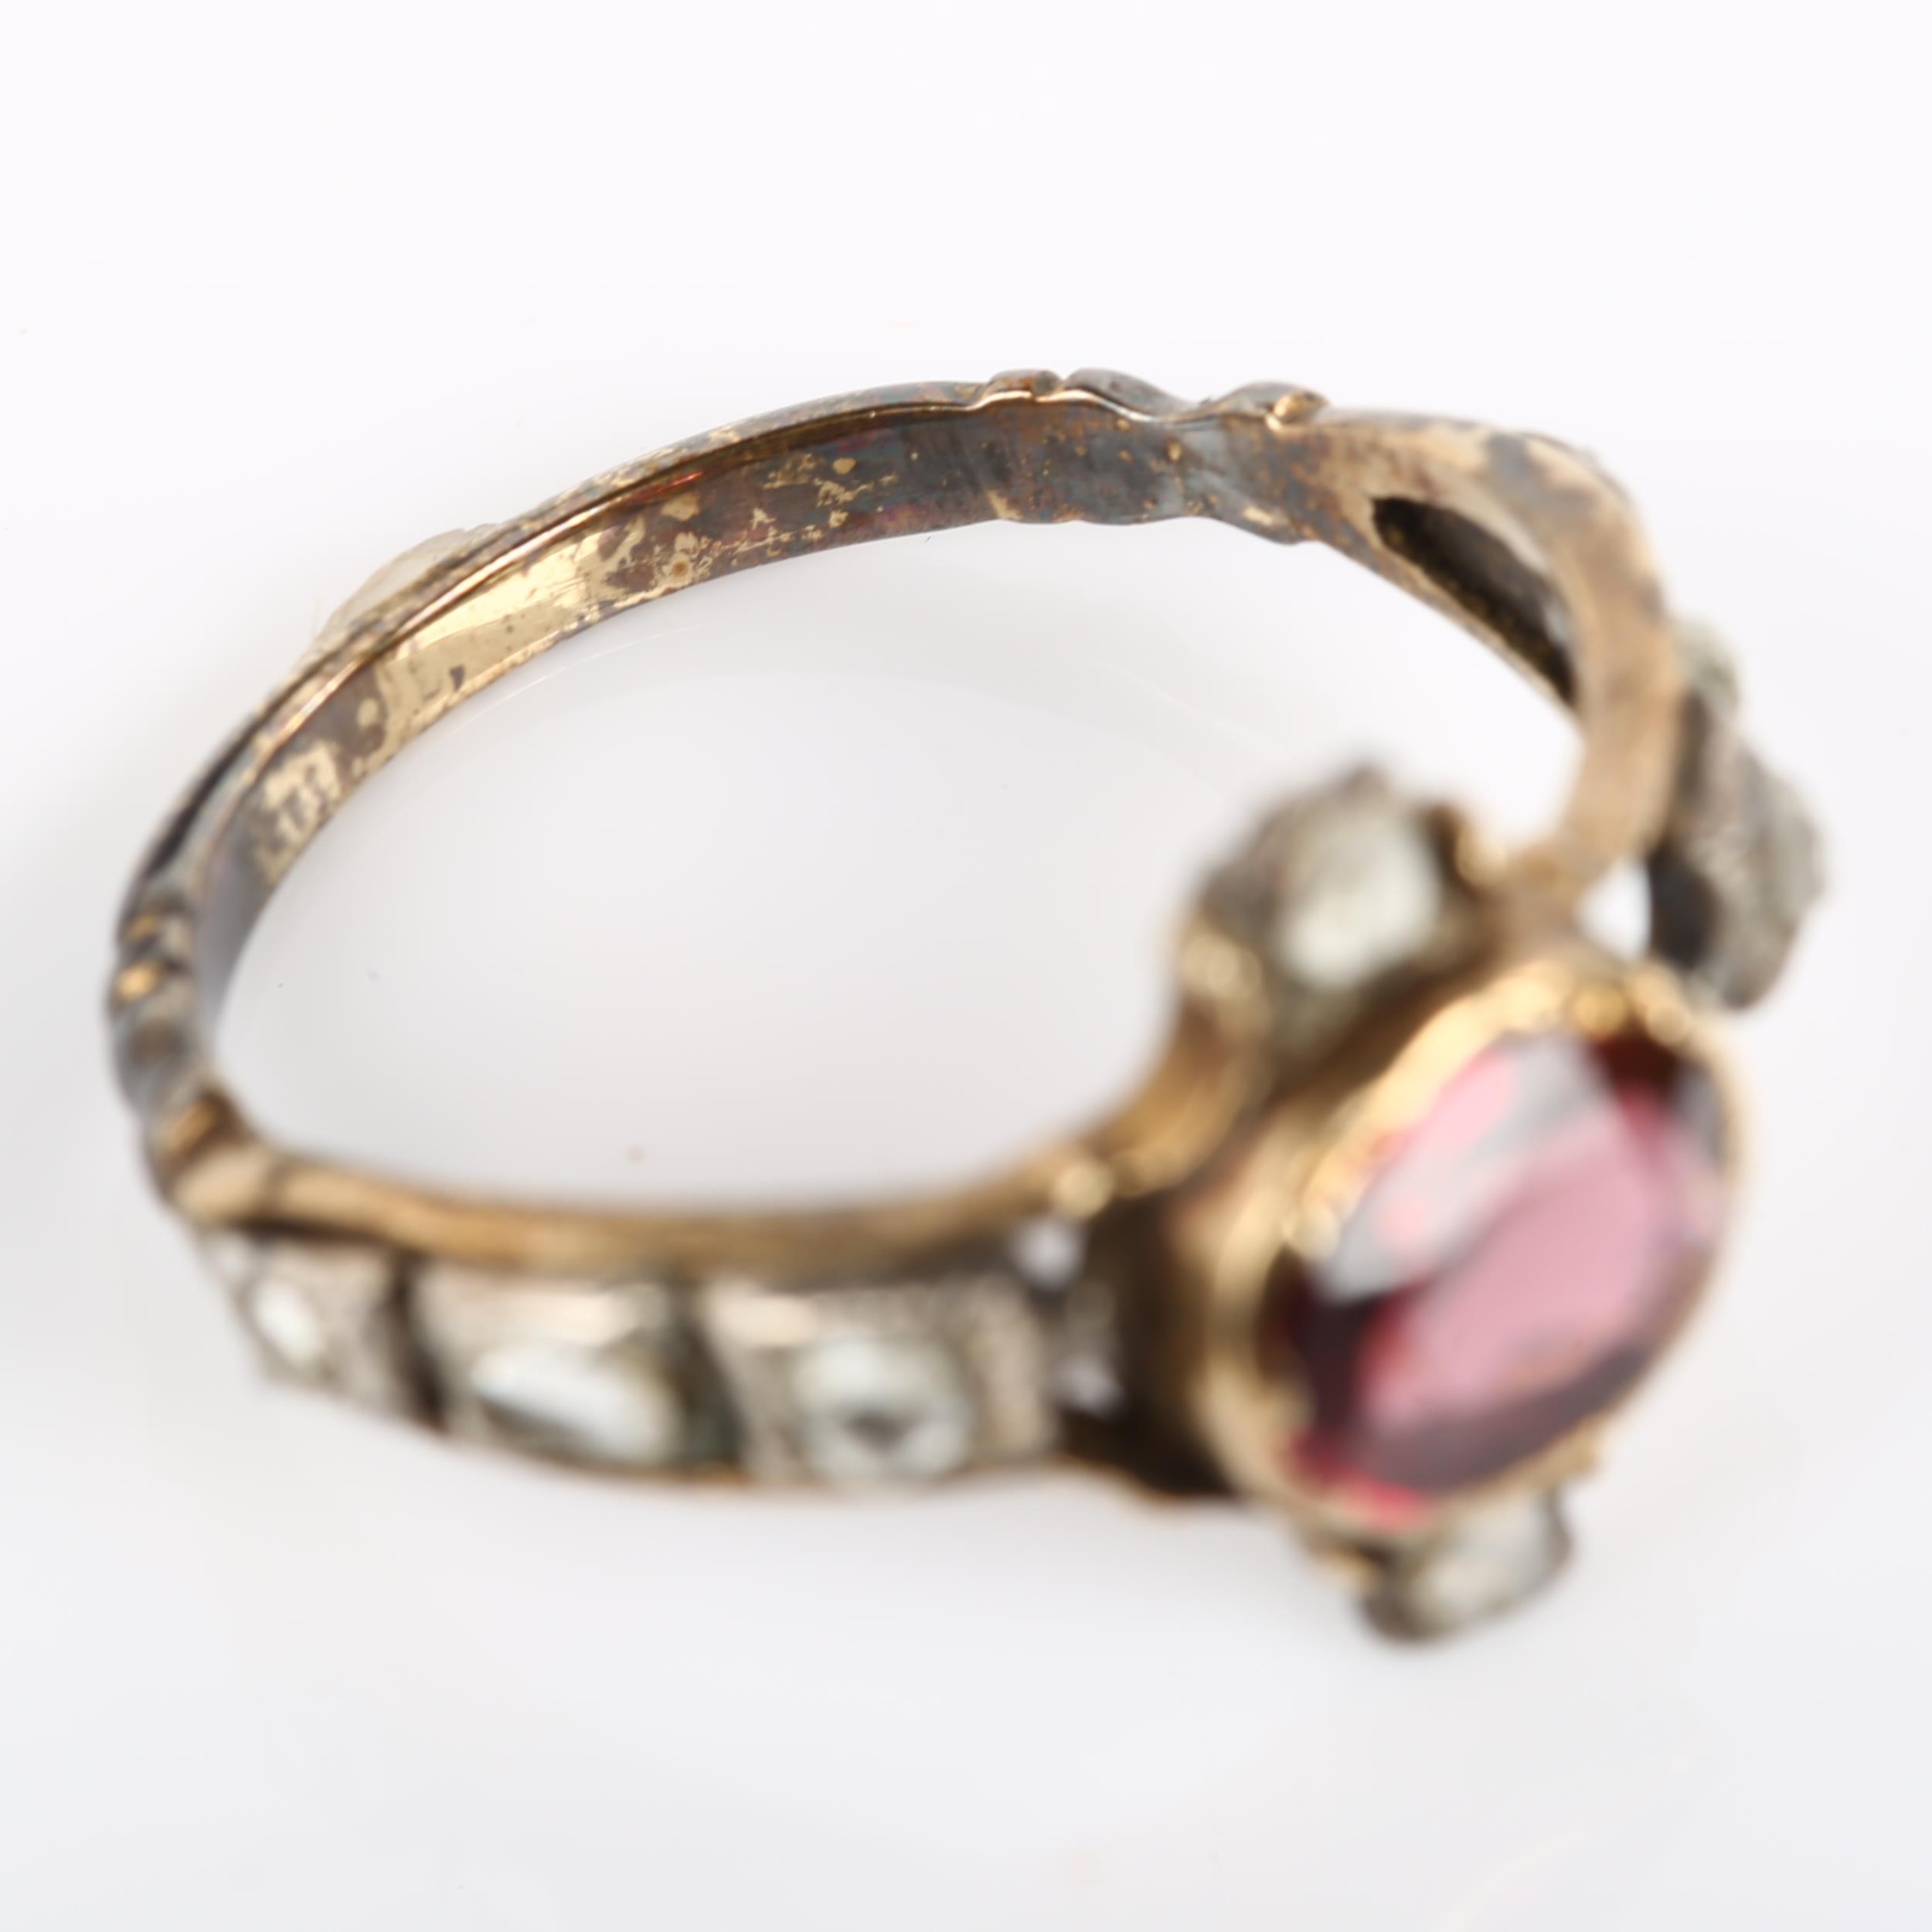 A Georgian garnet and diamond ring, unmarked gold settings with oval mixed-cut garnet and rose-cut - Image 3 of 4